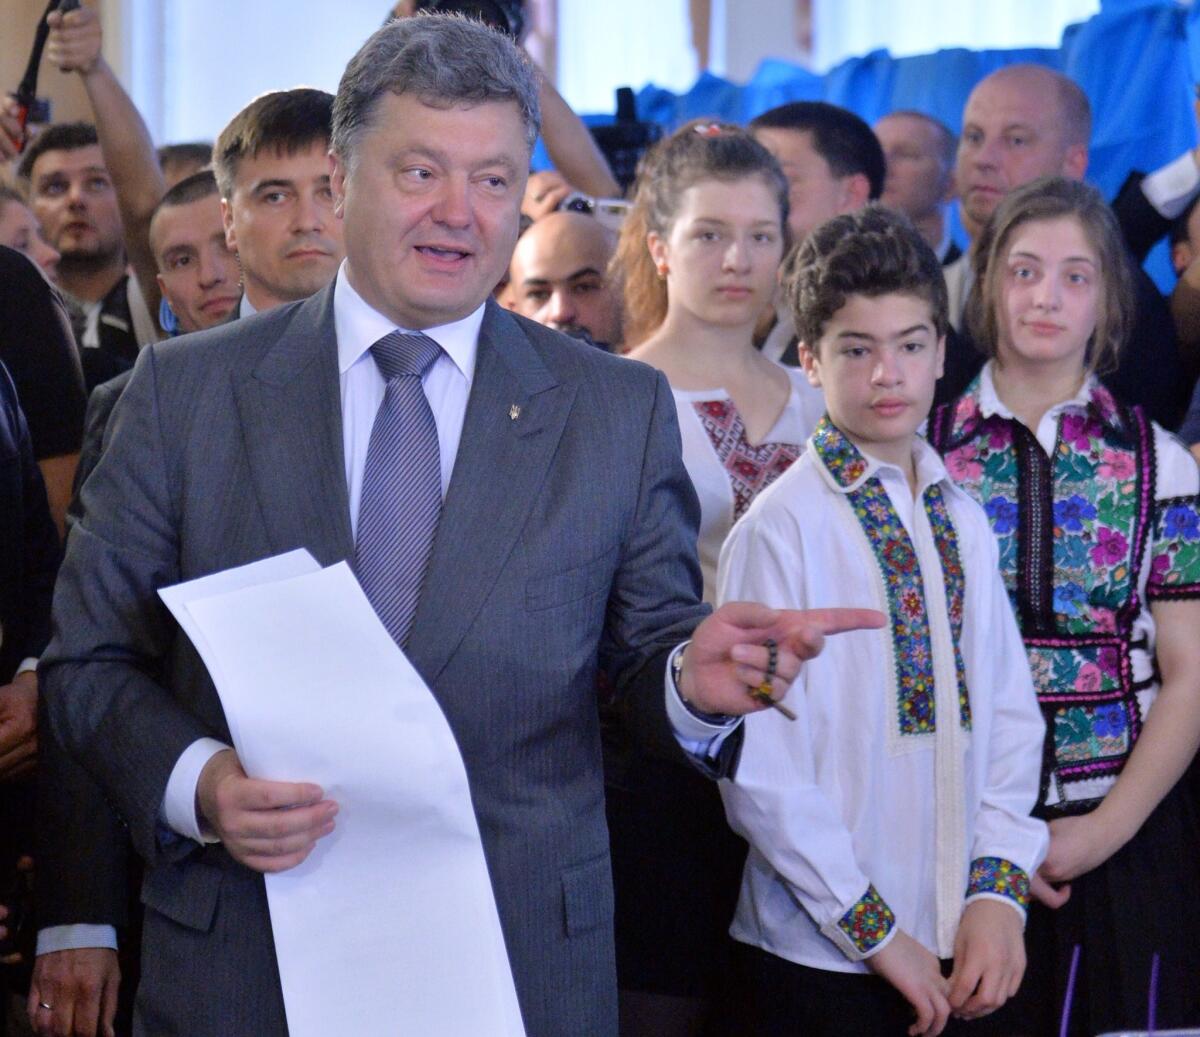 Ukrainian presidential candidate Petro Poroshenko casting his ballot in Kiev on Sunday. Exit polls indicate he won an outright majority of votes, which would allow him to avoid a runoff.